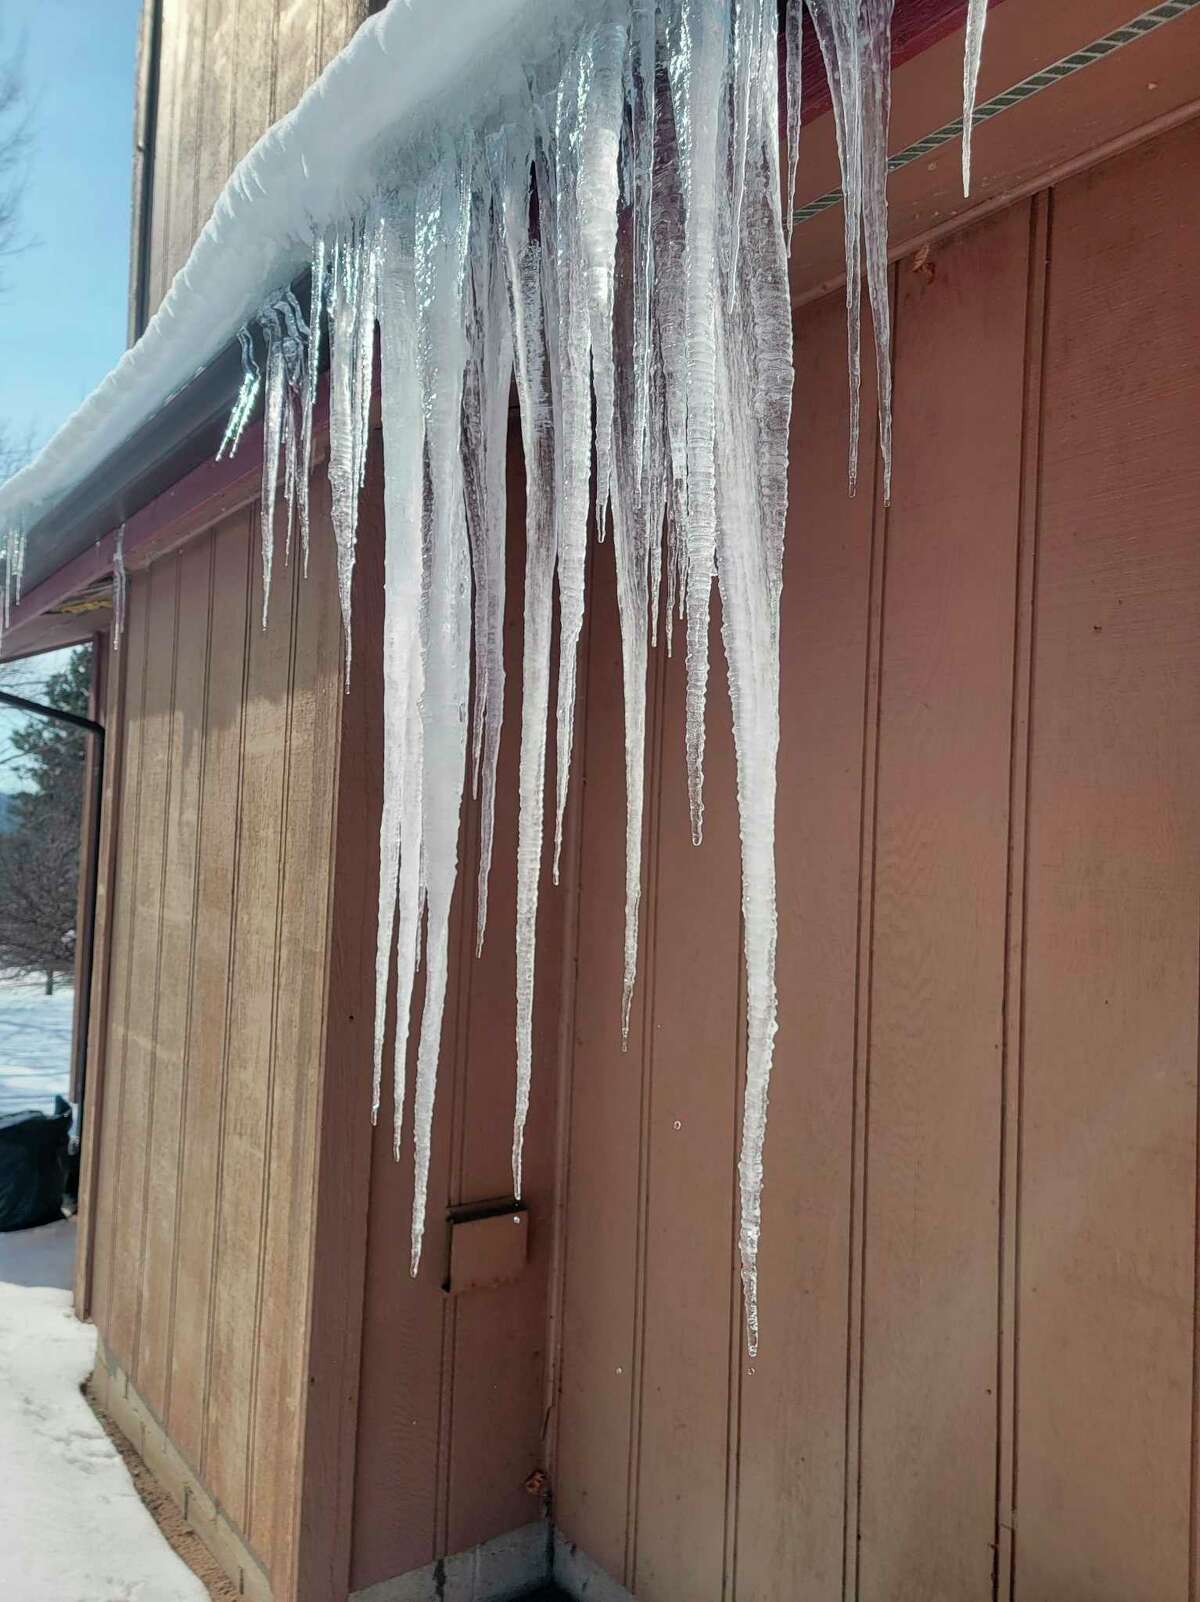 Ice dams can form when snow on a heated roof melts and then freezes further down on the unheated eaves. (Colin Merry/Record Patriot)